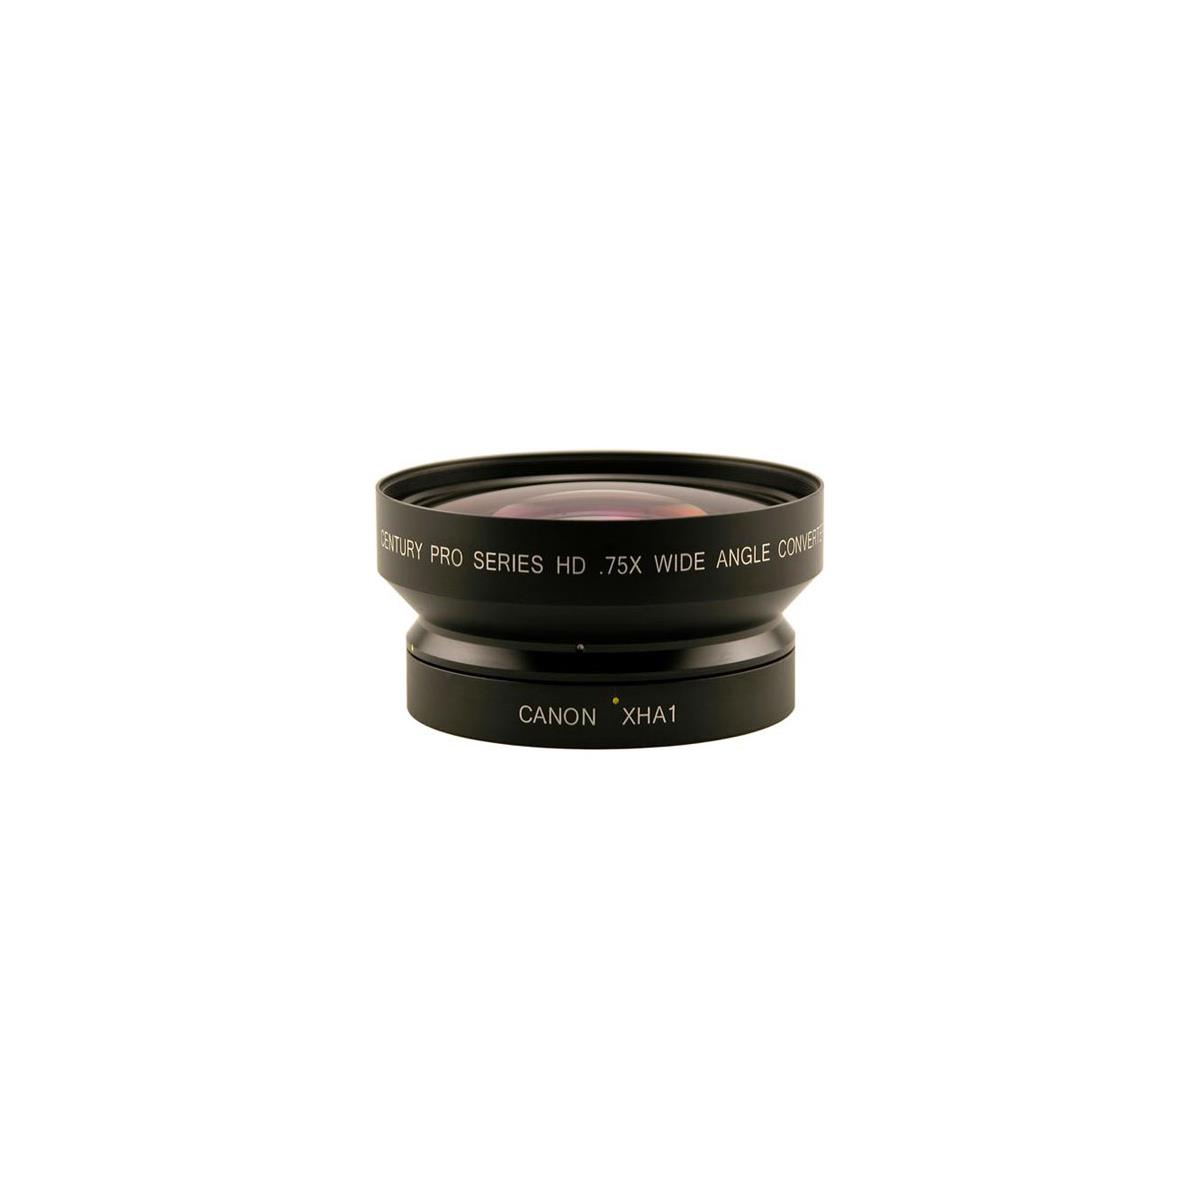 Image of Century Optics .75x Wide Angle Converter for Canon XH-A1